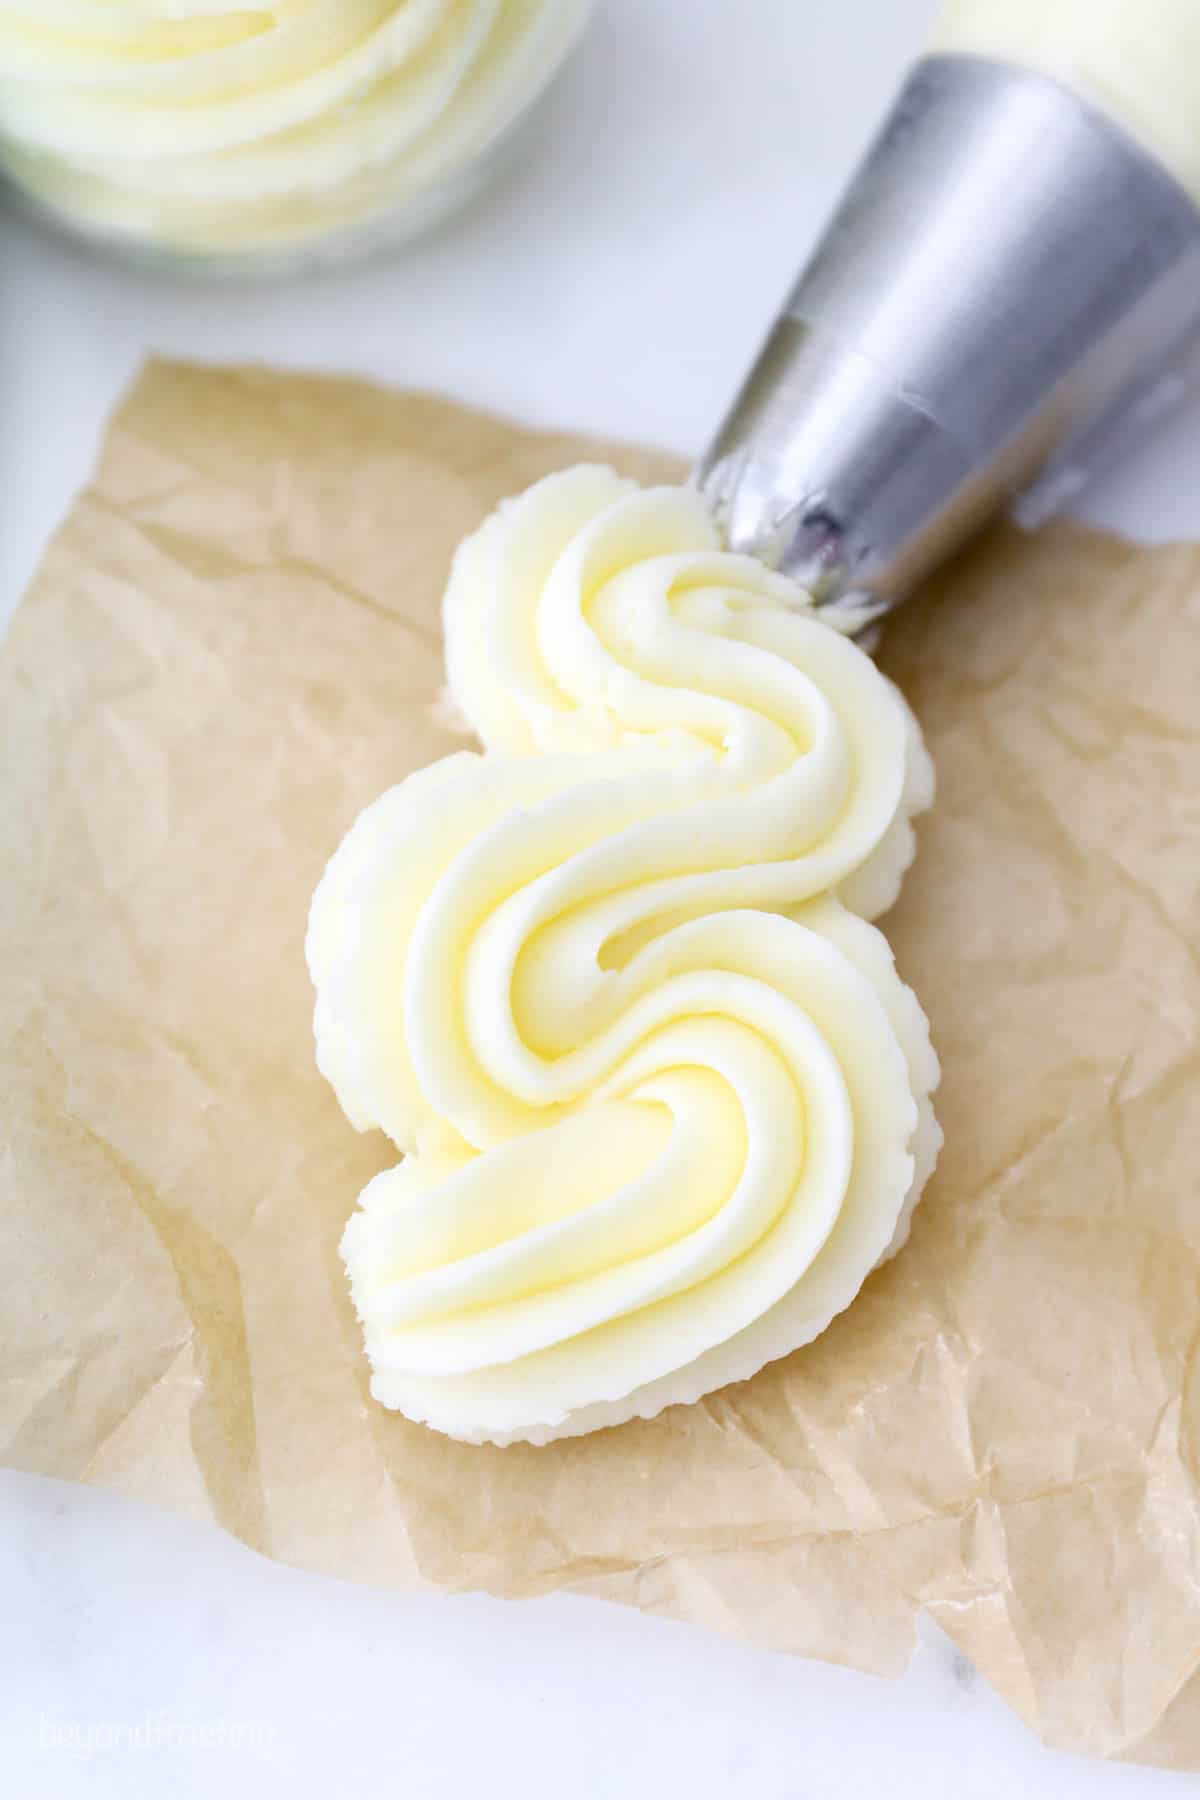 A big swirl of vanilla frosting piped onto a crumpled piece of brown parchment paper.